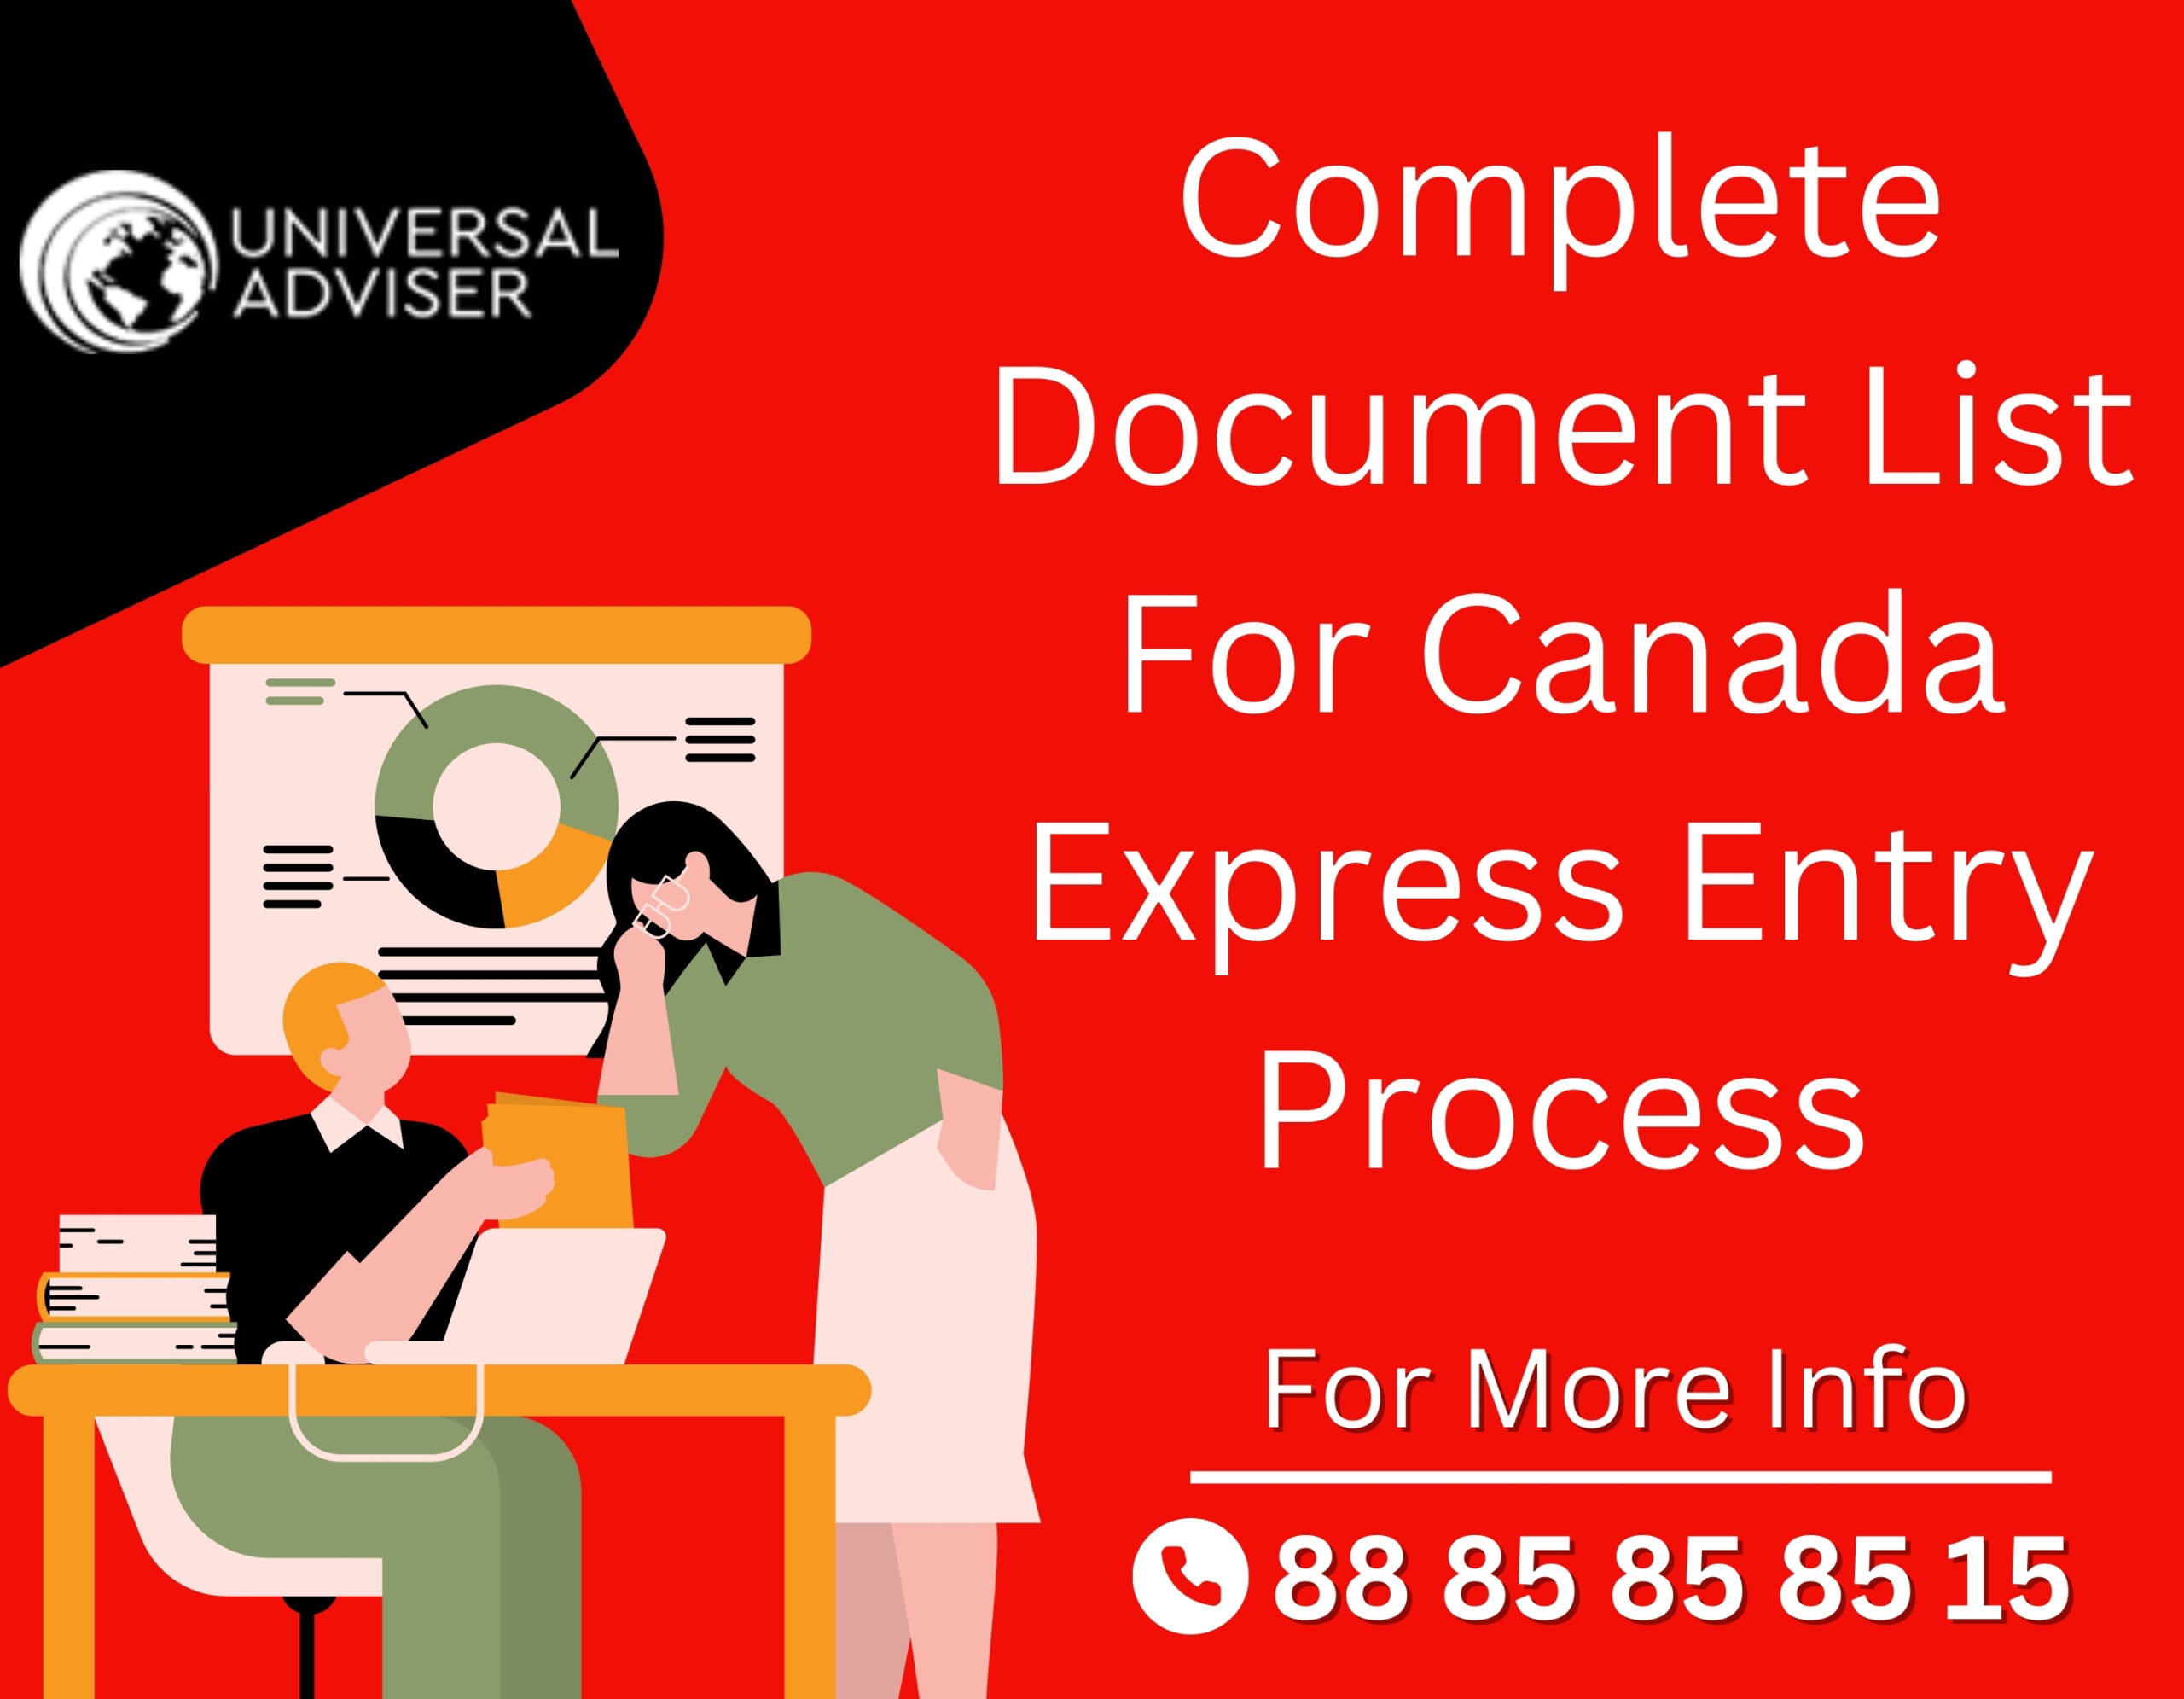 Complete Document List For Canada Express Entry Process